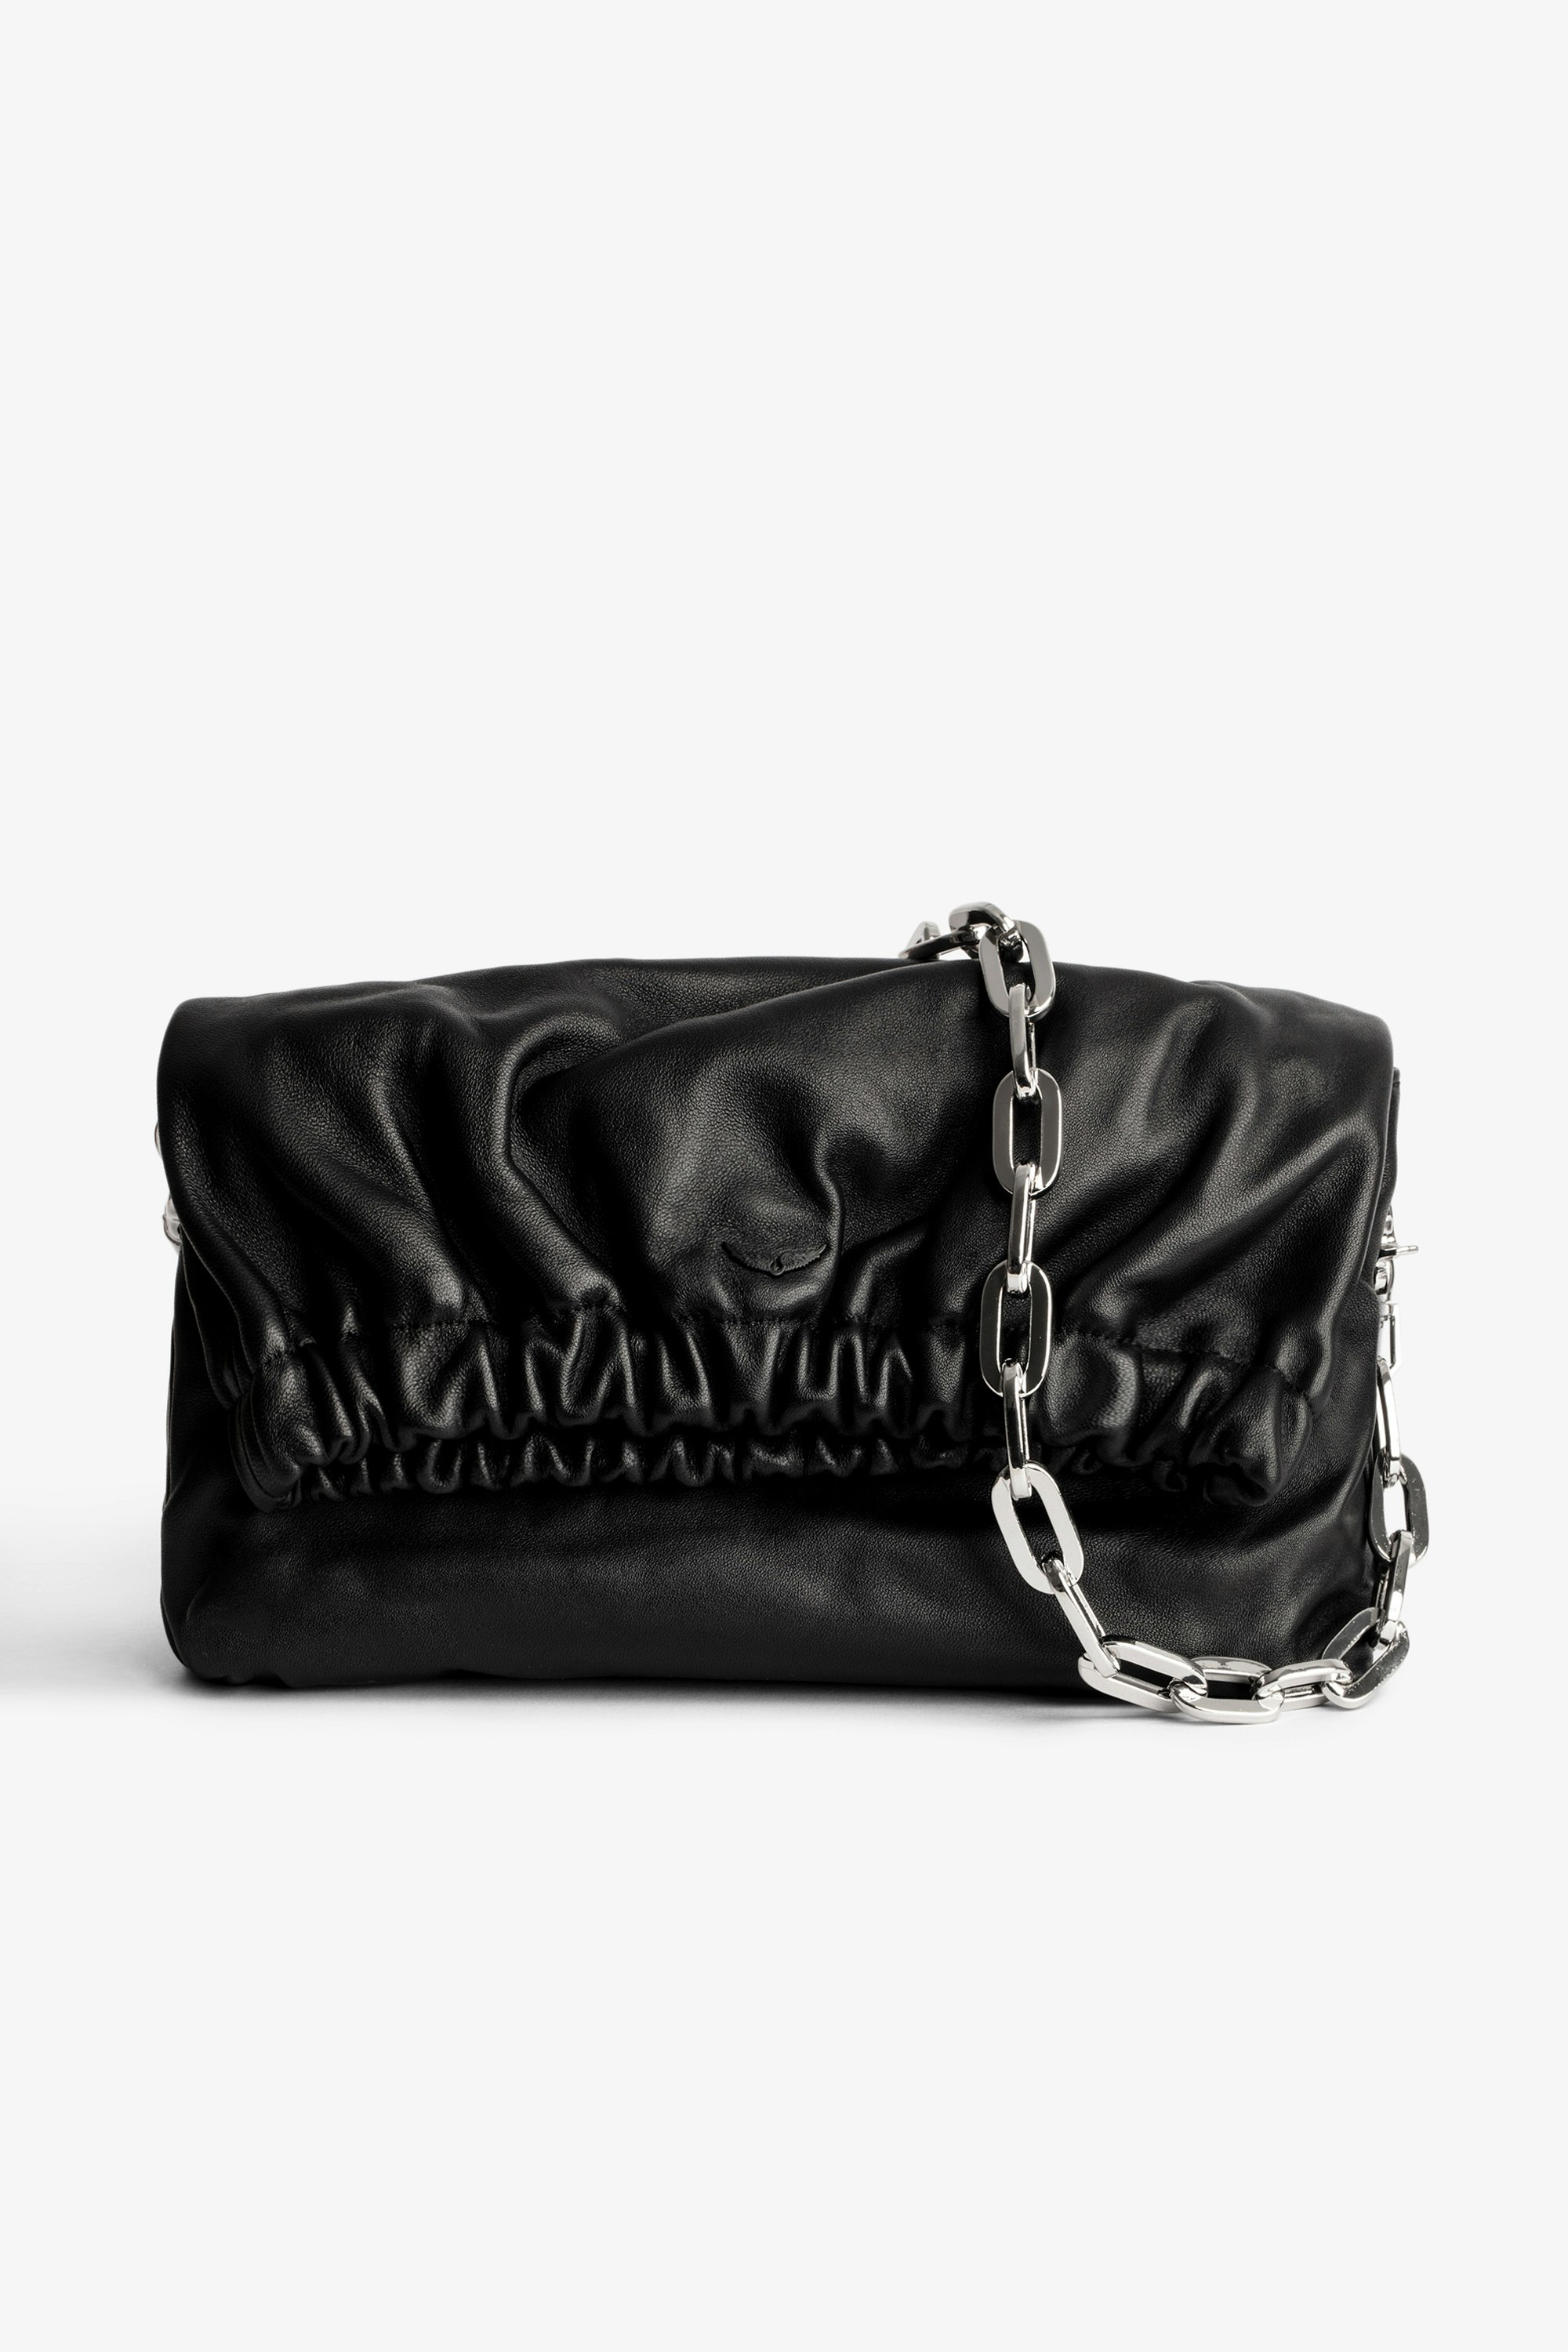 Rockyssime バッグ Women’s smooth black leather gathered clutch purse with silver chain